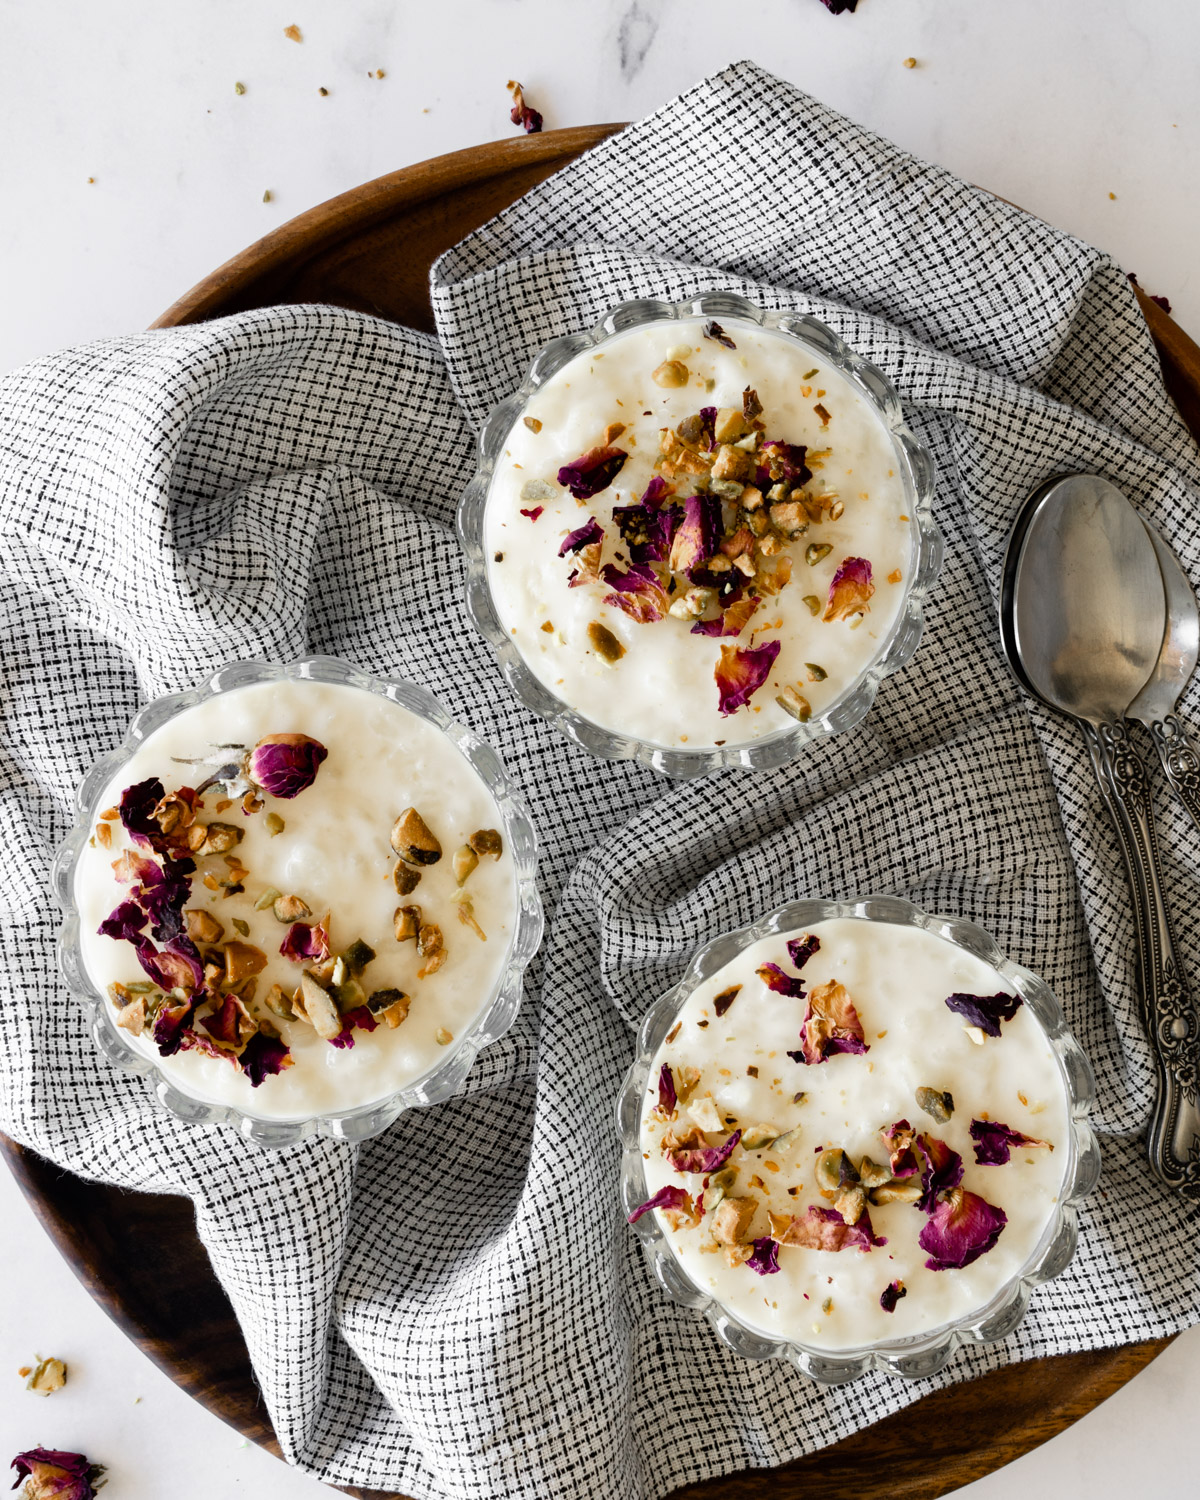 three bowls of lebanese rice pudding on a round wooden plate with a linen napkin and spoons.